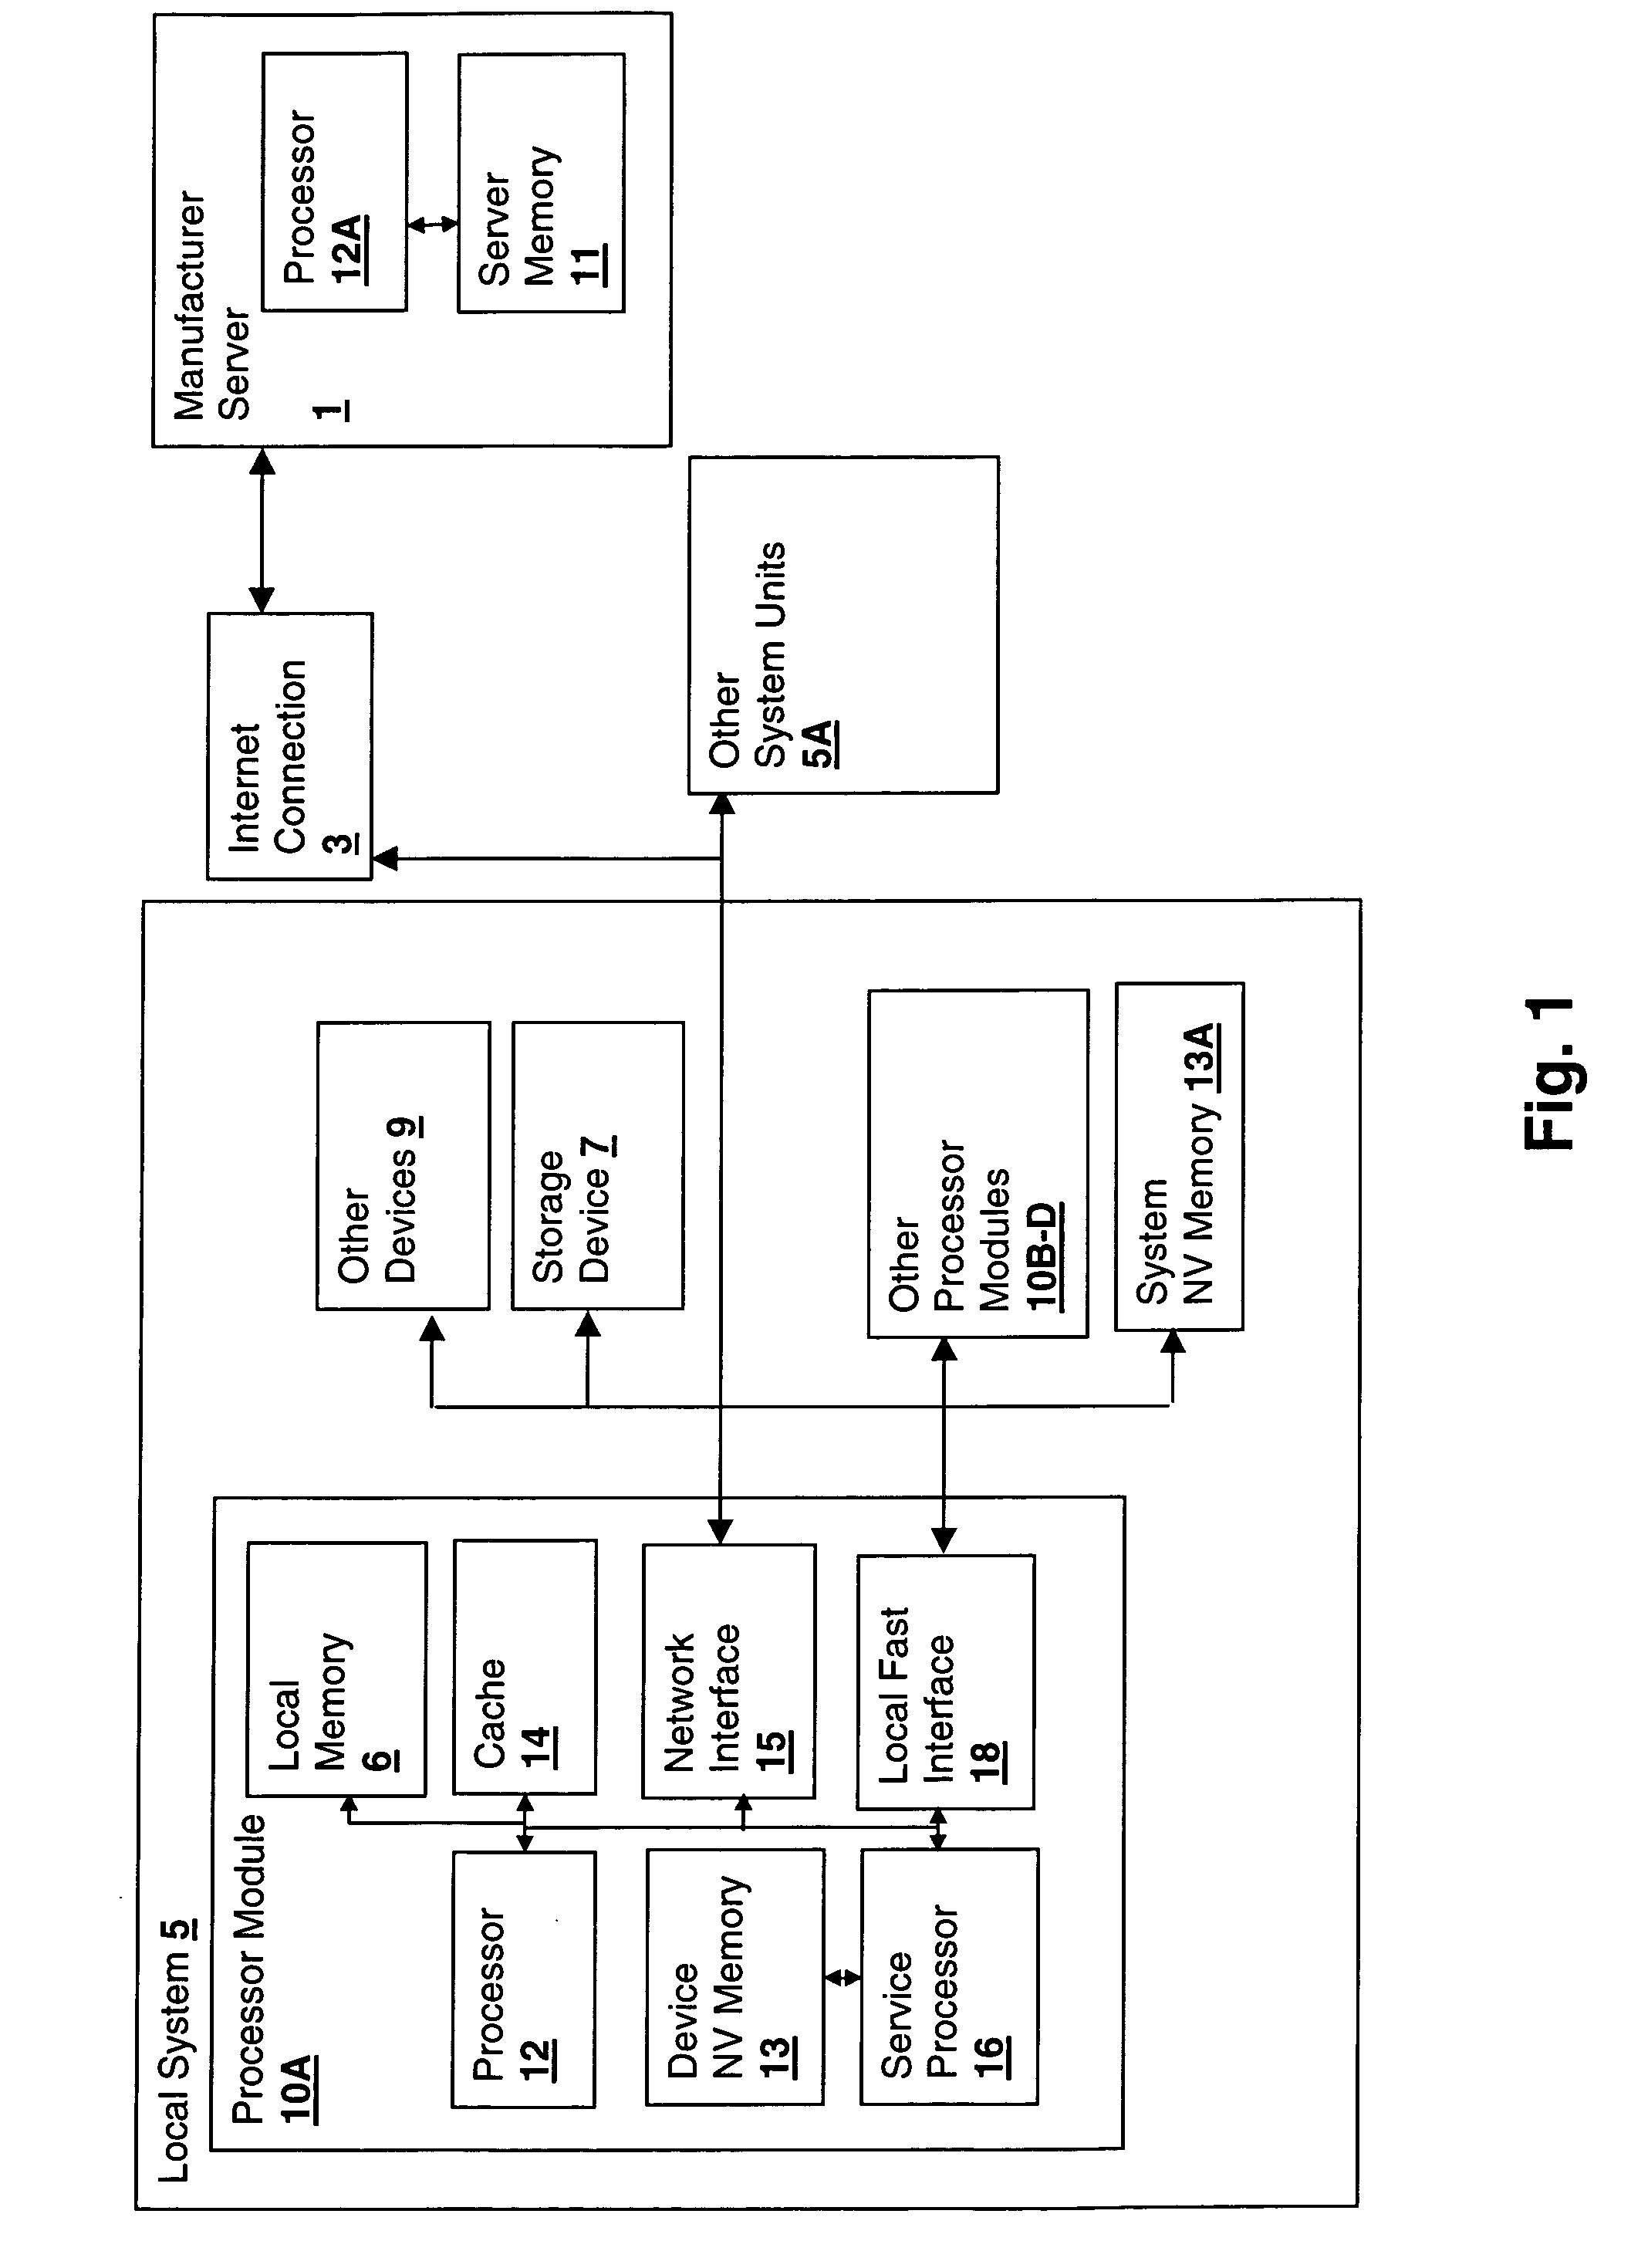 Method and system for backup and restore of a context encryption key for a trusted device within a secured processing system